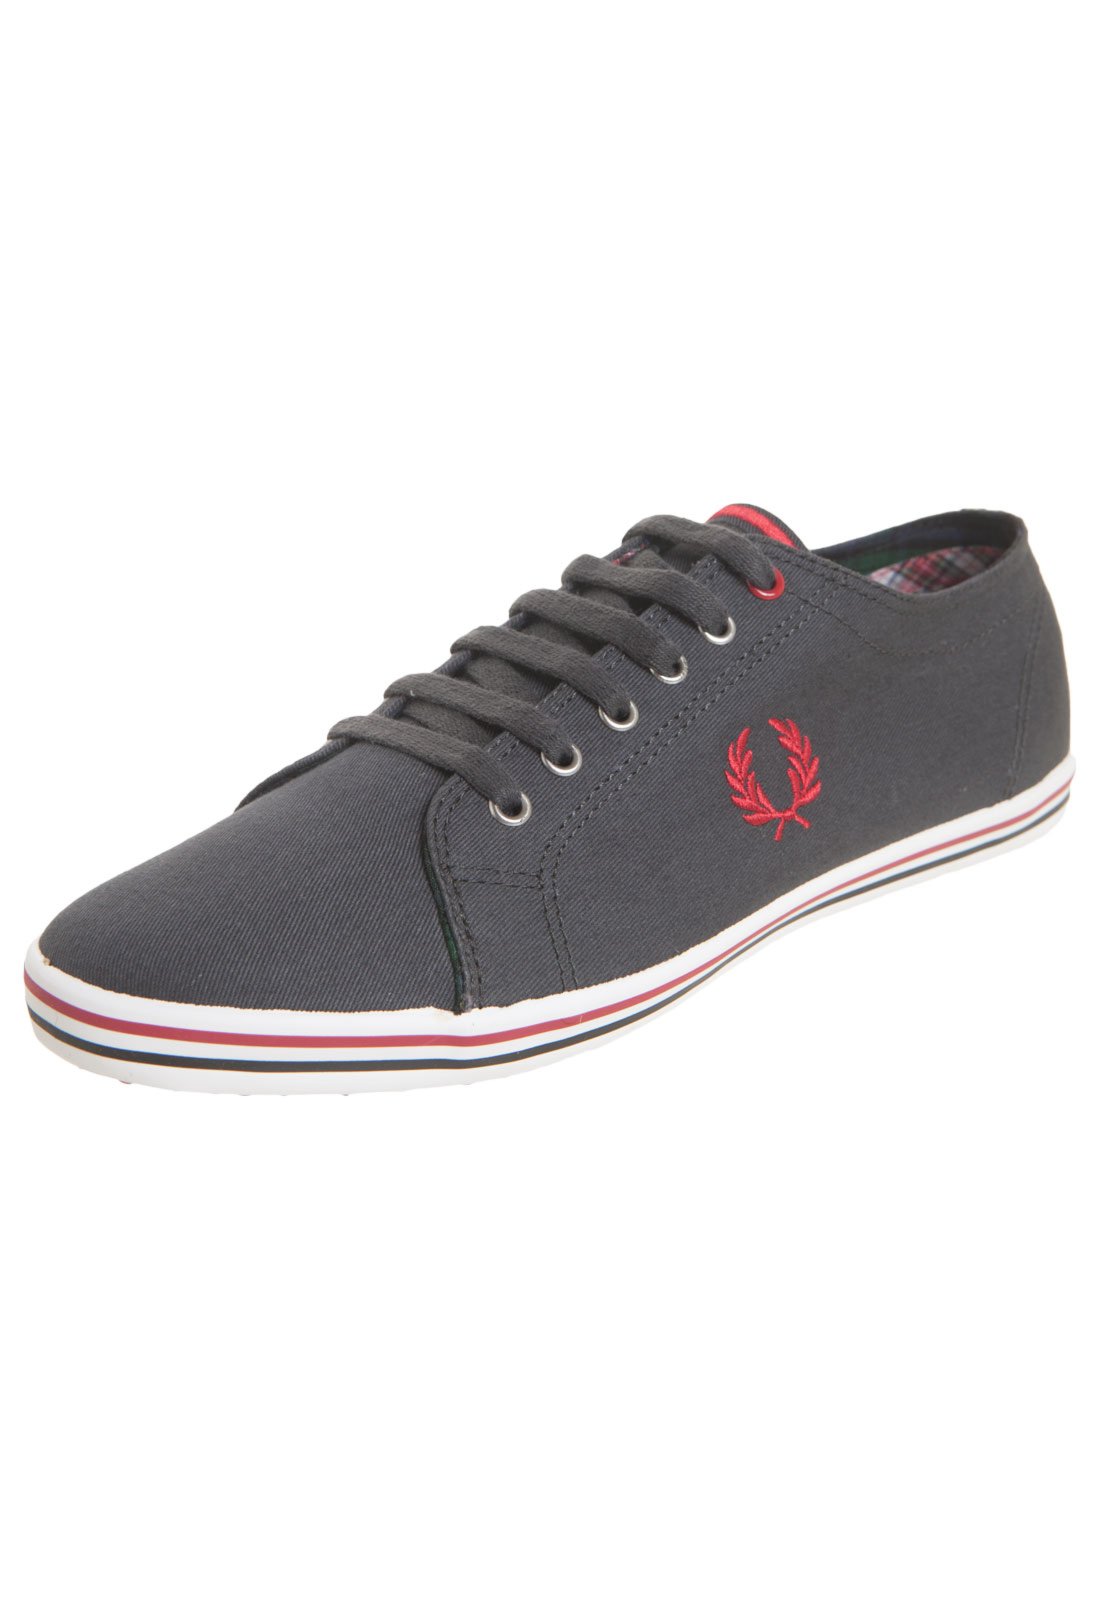 sapatenis masculino fred perry